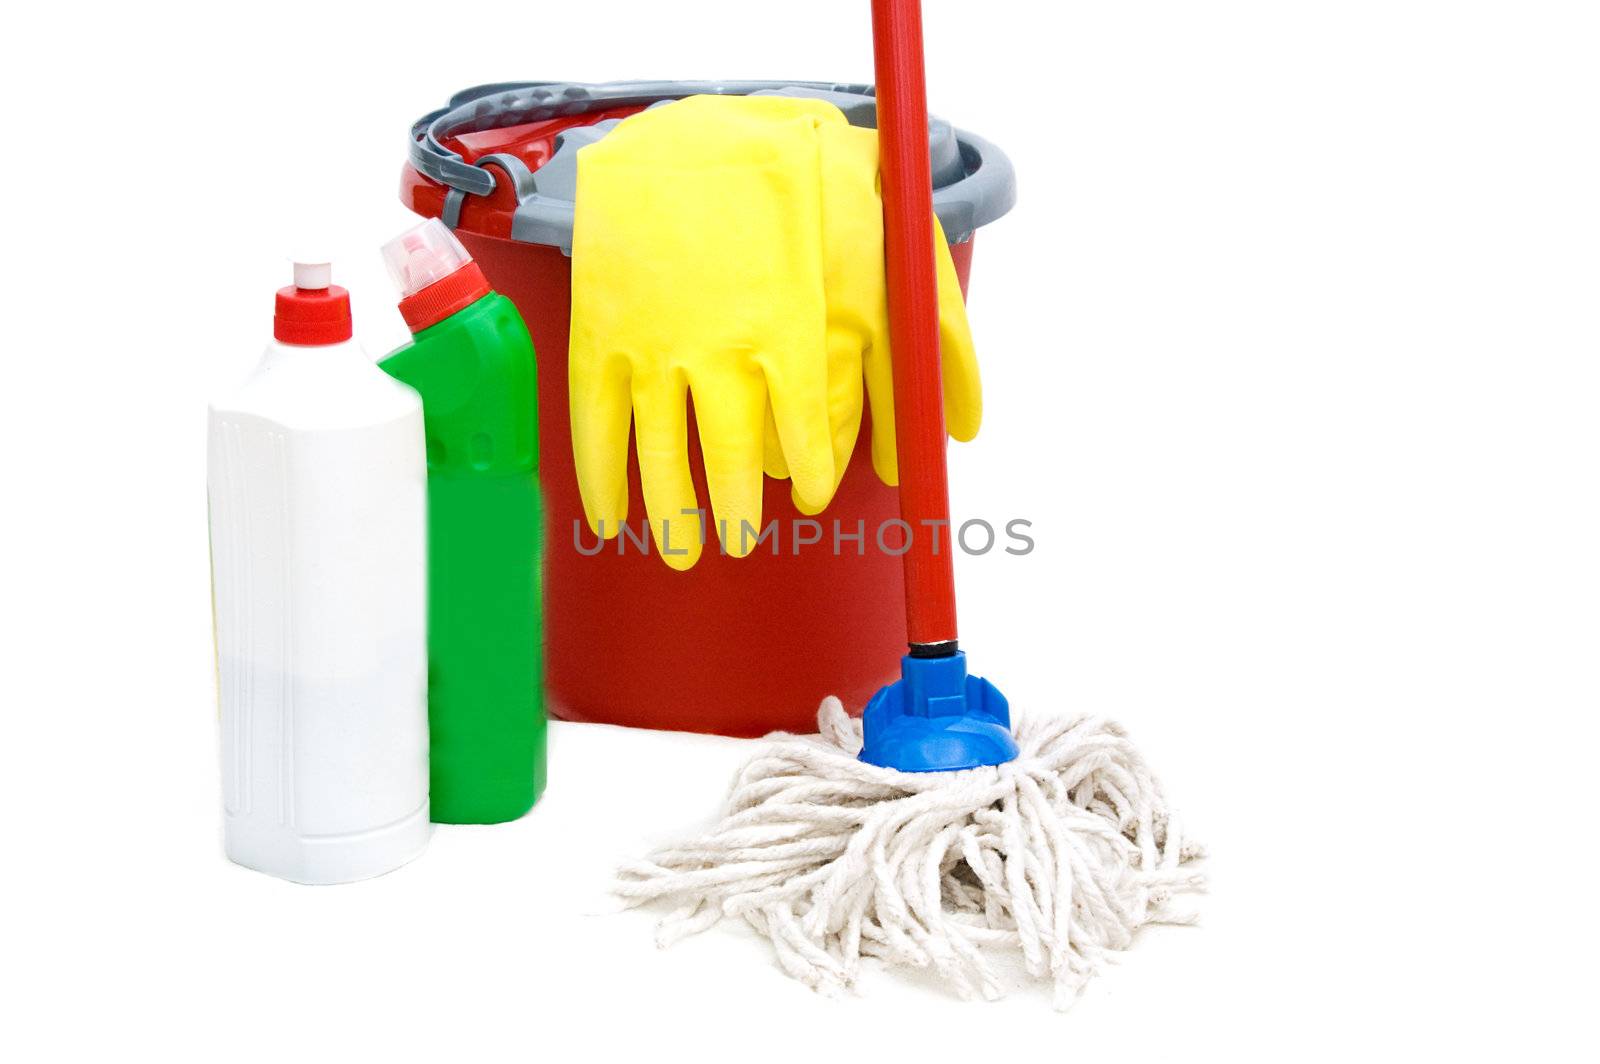 Cleaning tools with bucket, mops over white